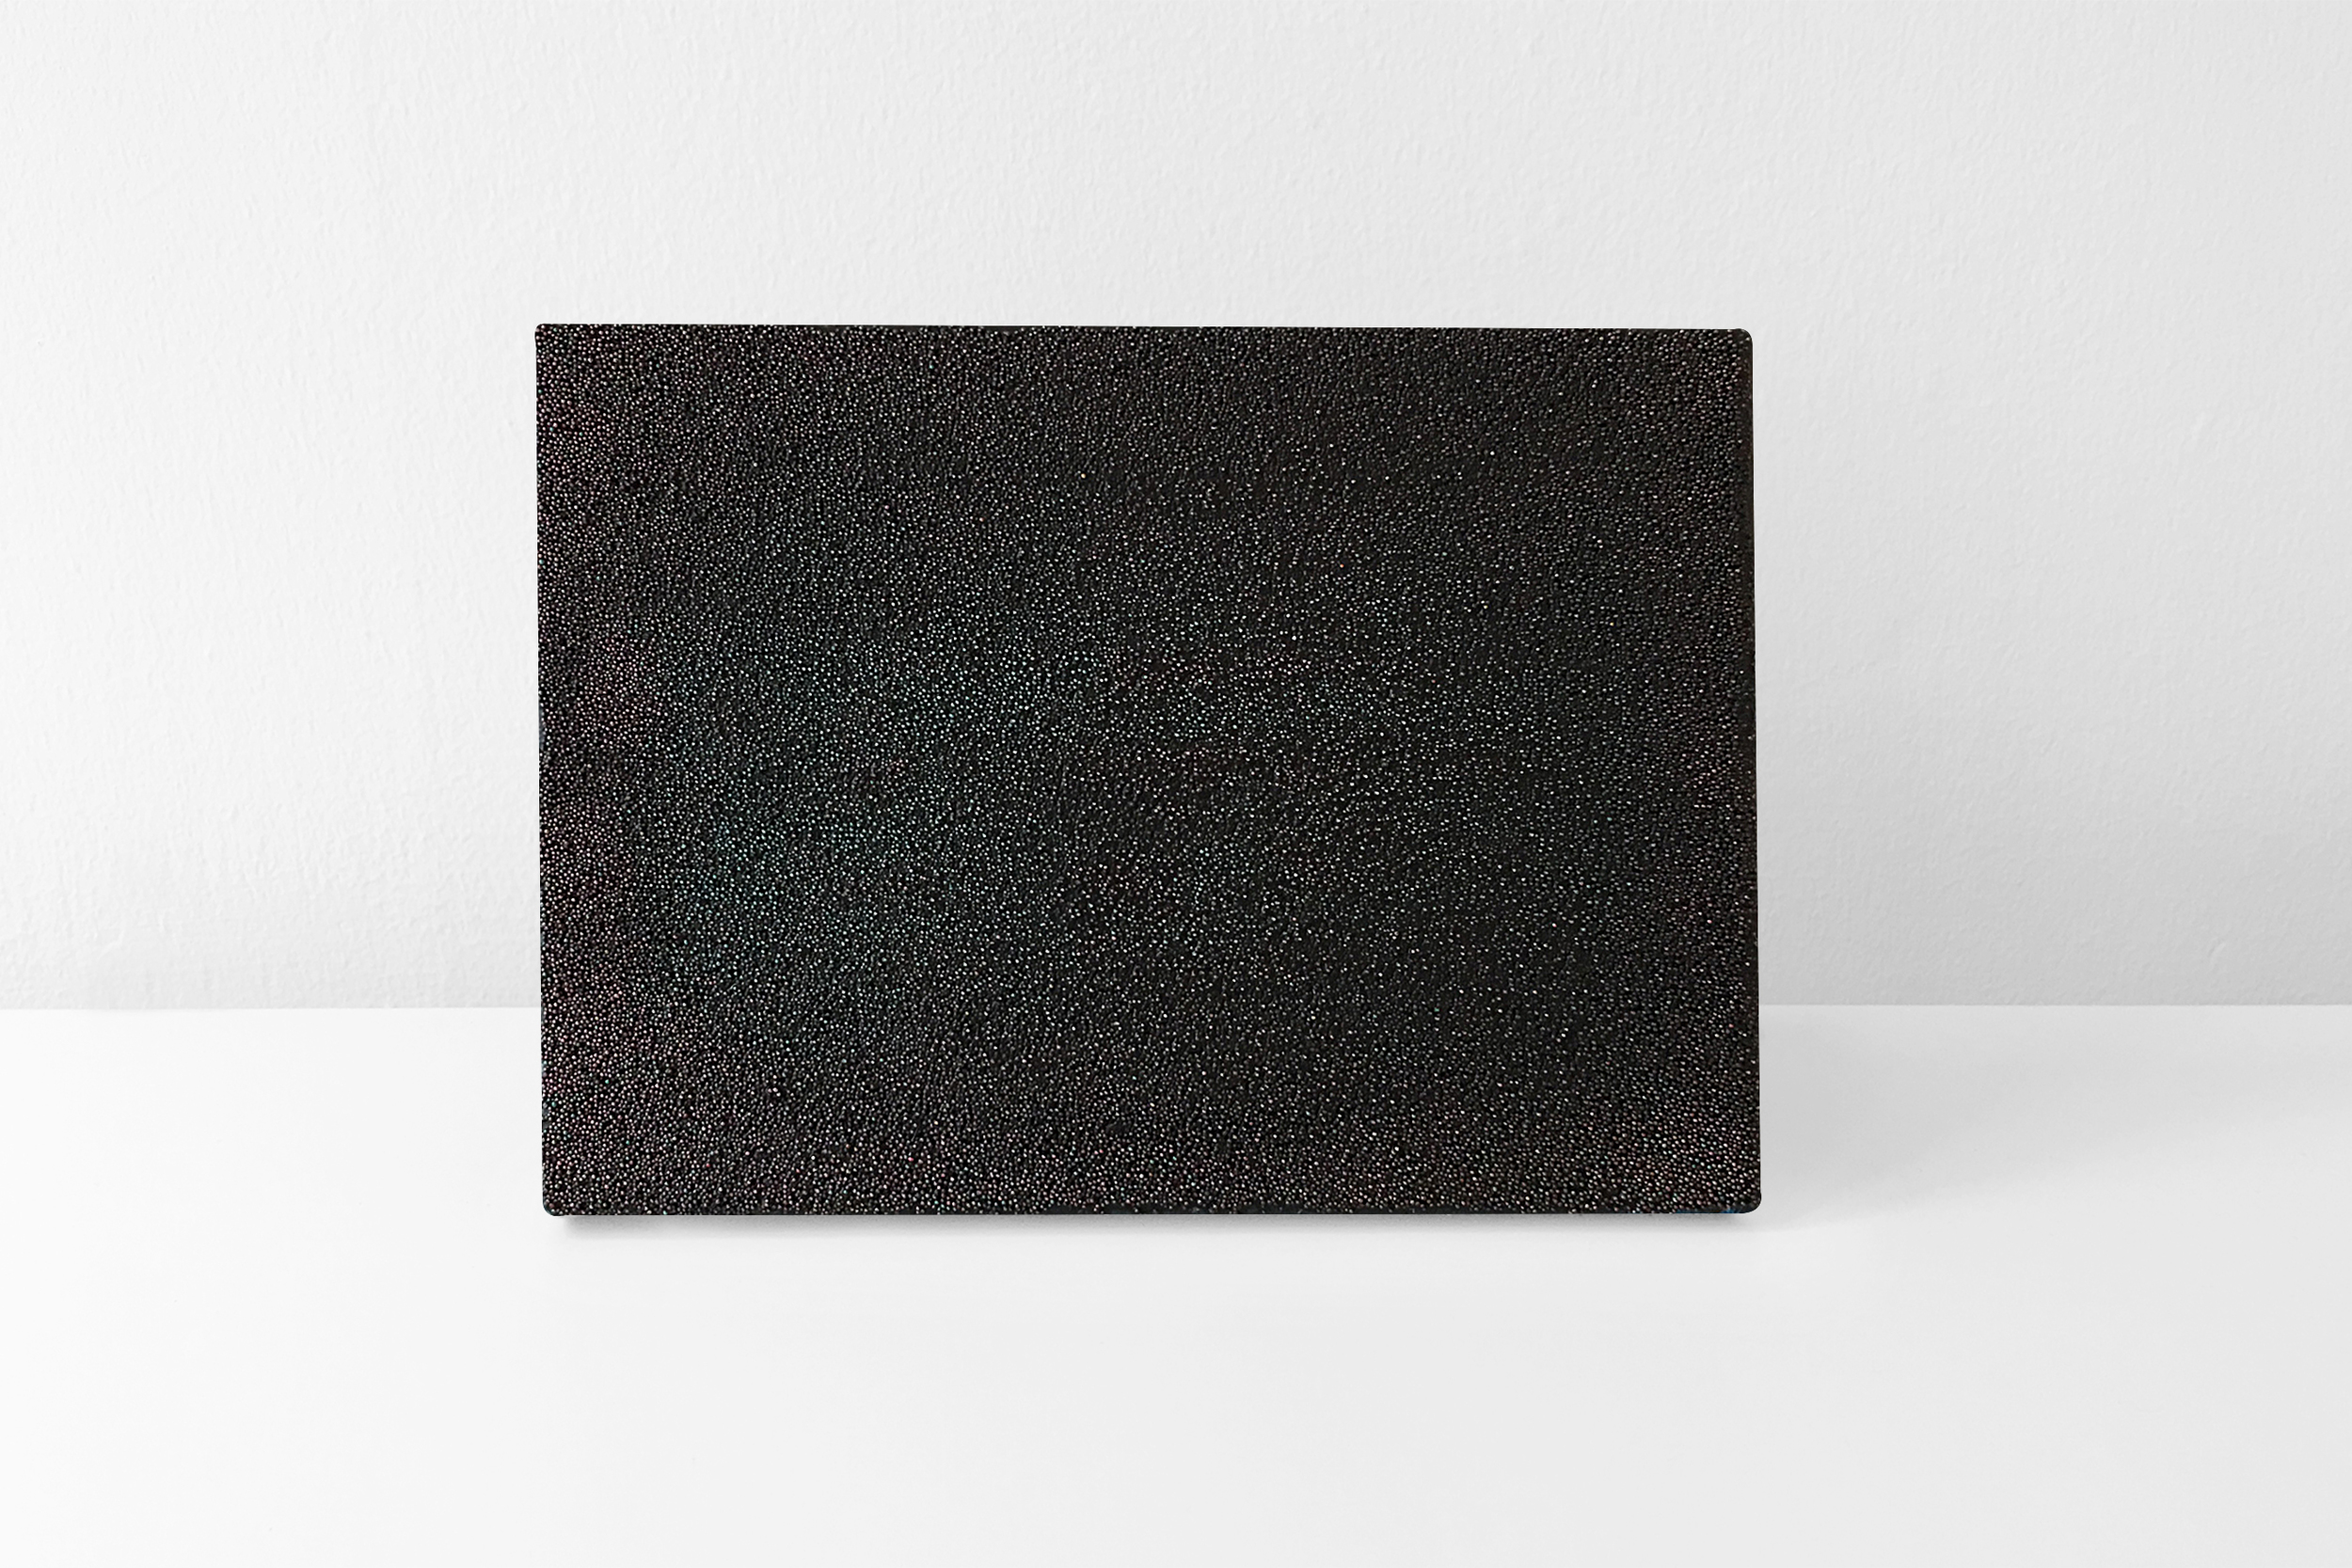  Black dots, 2015 mixed media on canvas 19x24 cm / 7.5x9 in EAF110    